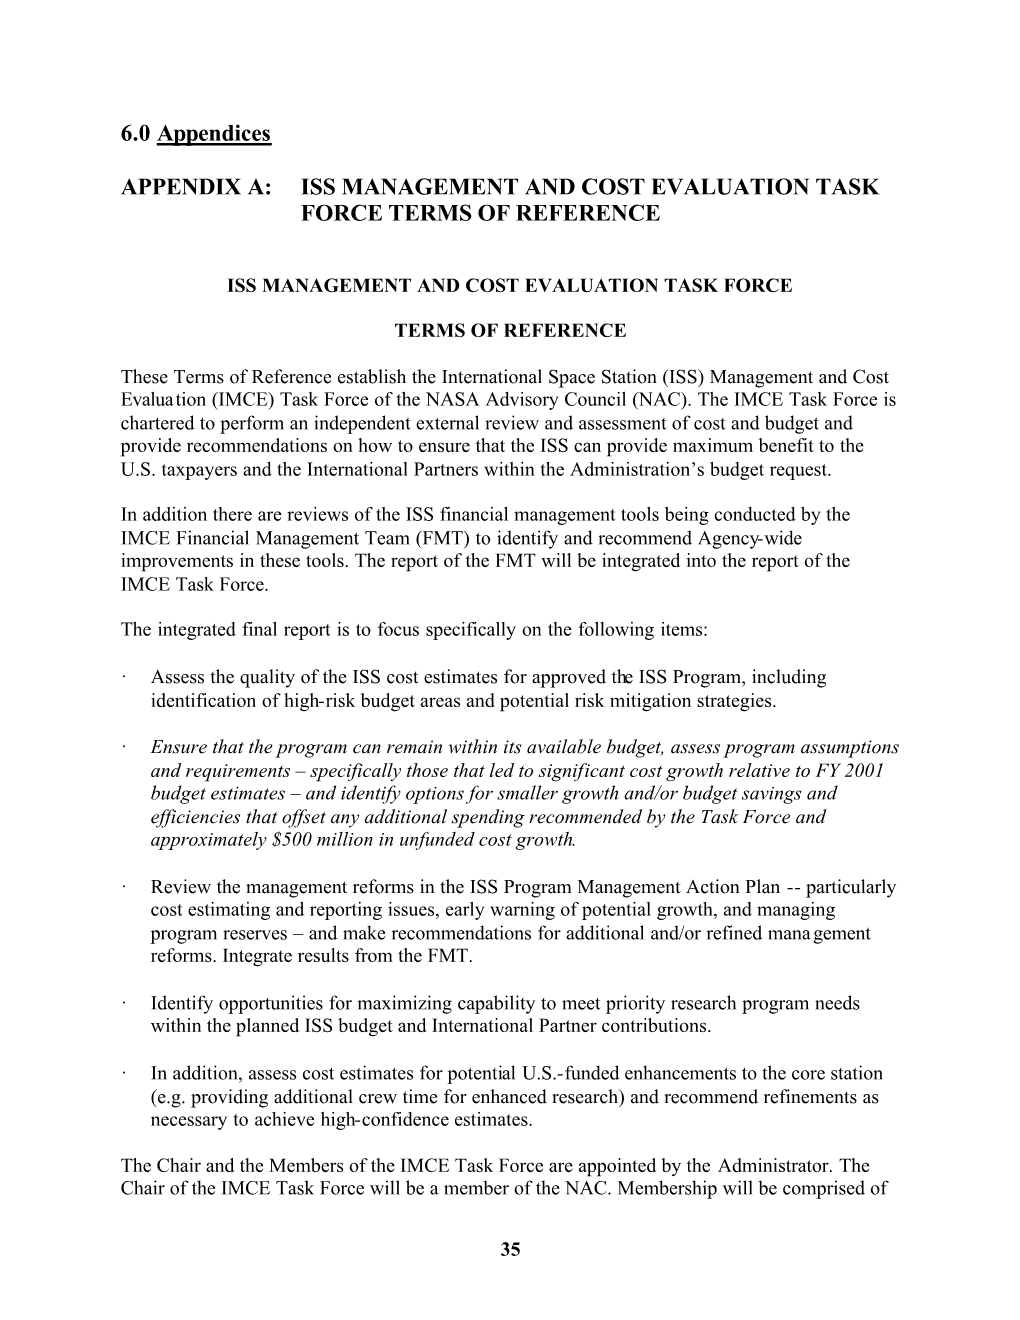 Iss Management and Cost Evaluation Task Force Terms of Reference